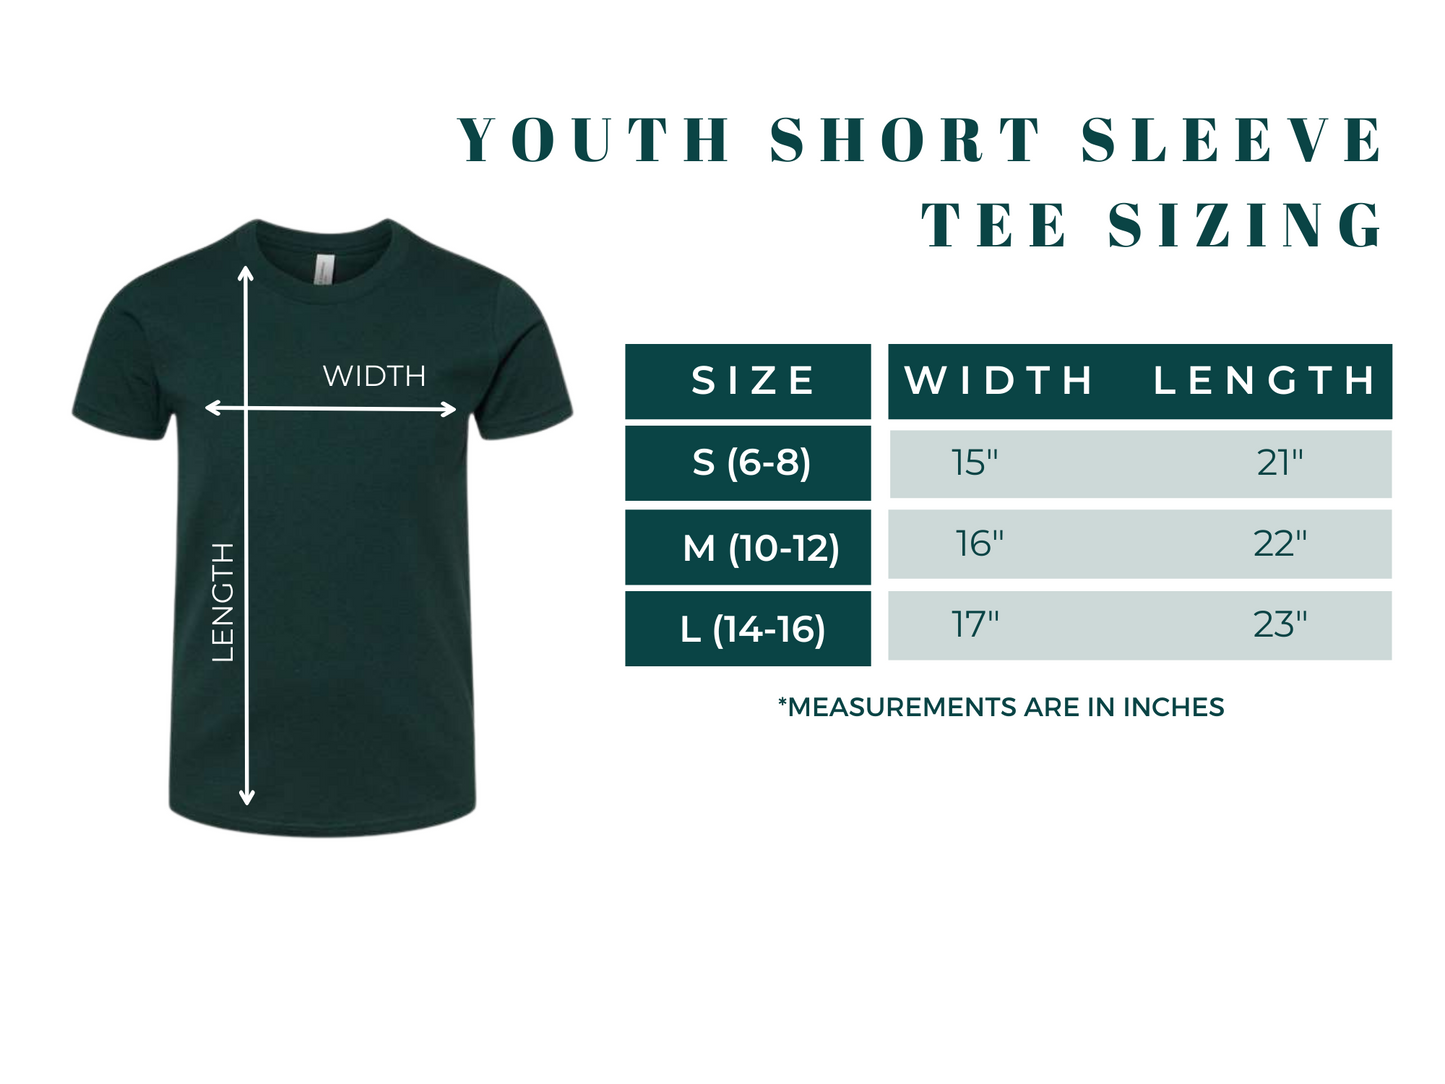 Second Grade Vibes | Short Sleeve Youth Tee